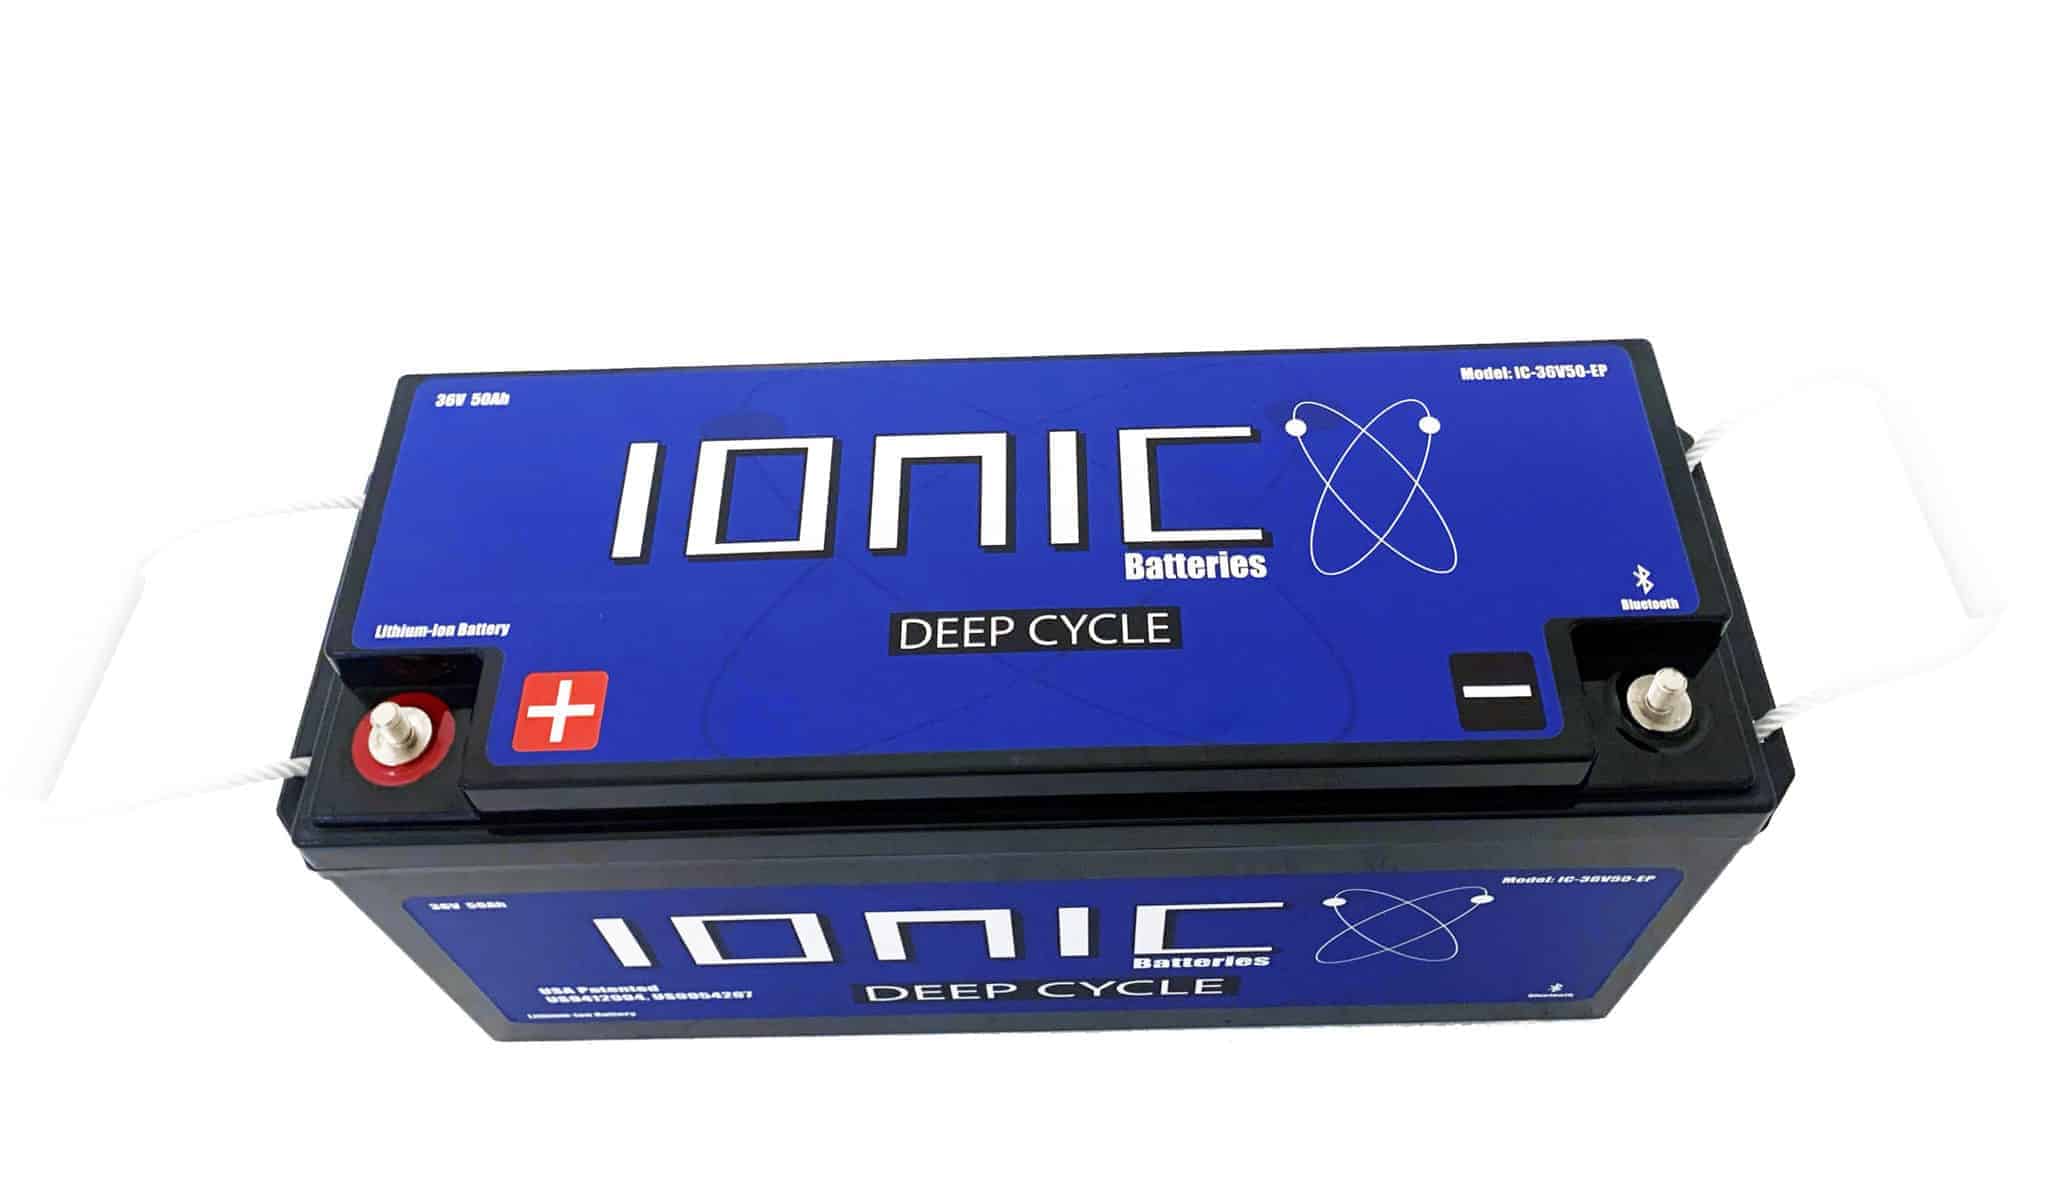 Buy Our 24 Volt 50Ah 24V Lithium Battery, Free Shipping, 58% OFF